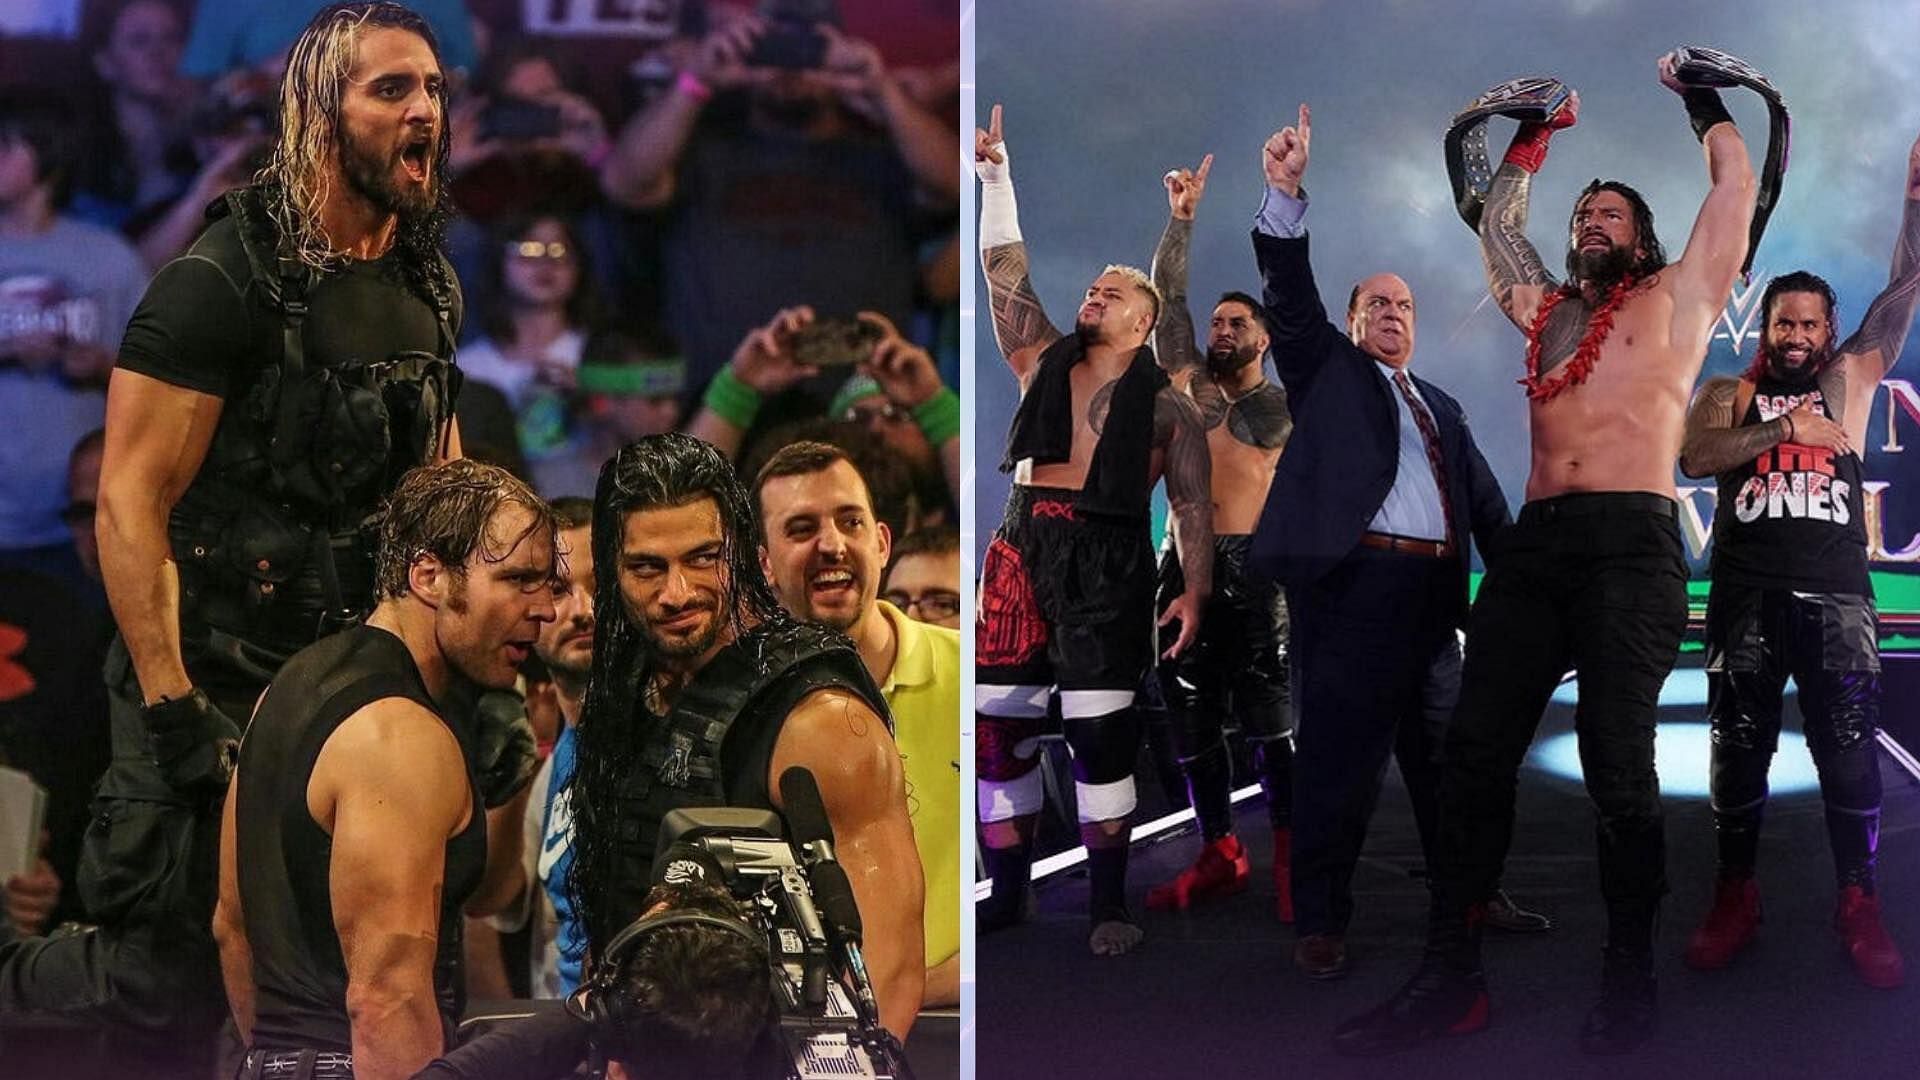 There are many dream matches for The Shield in WWE